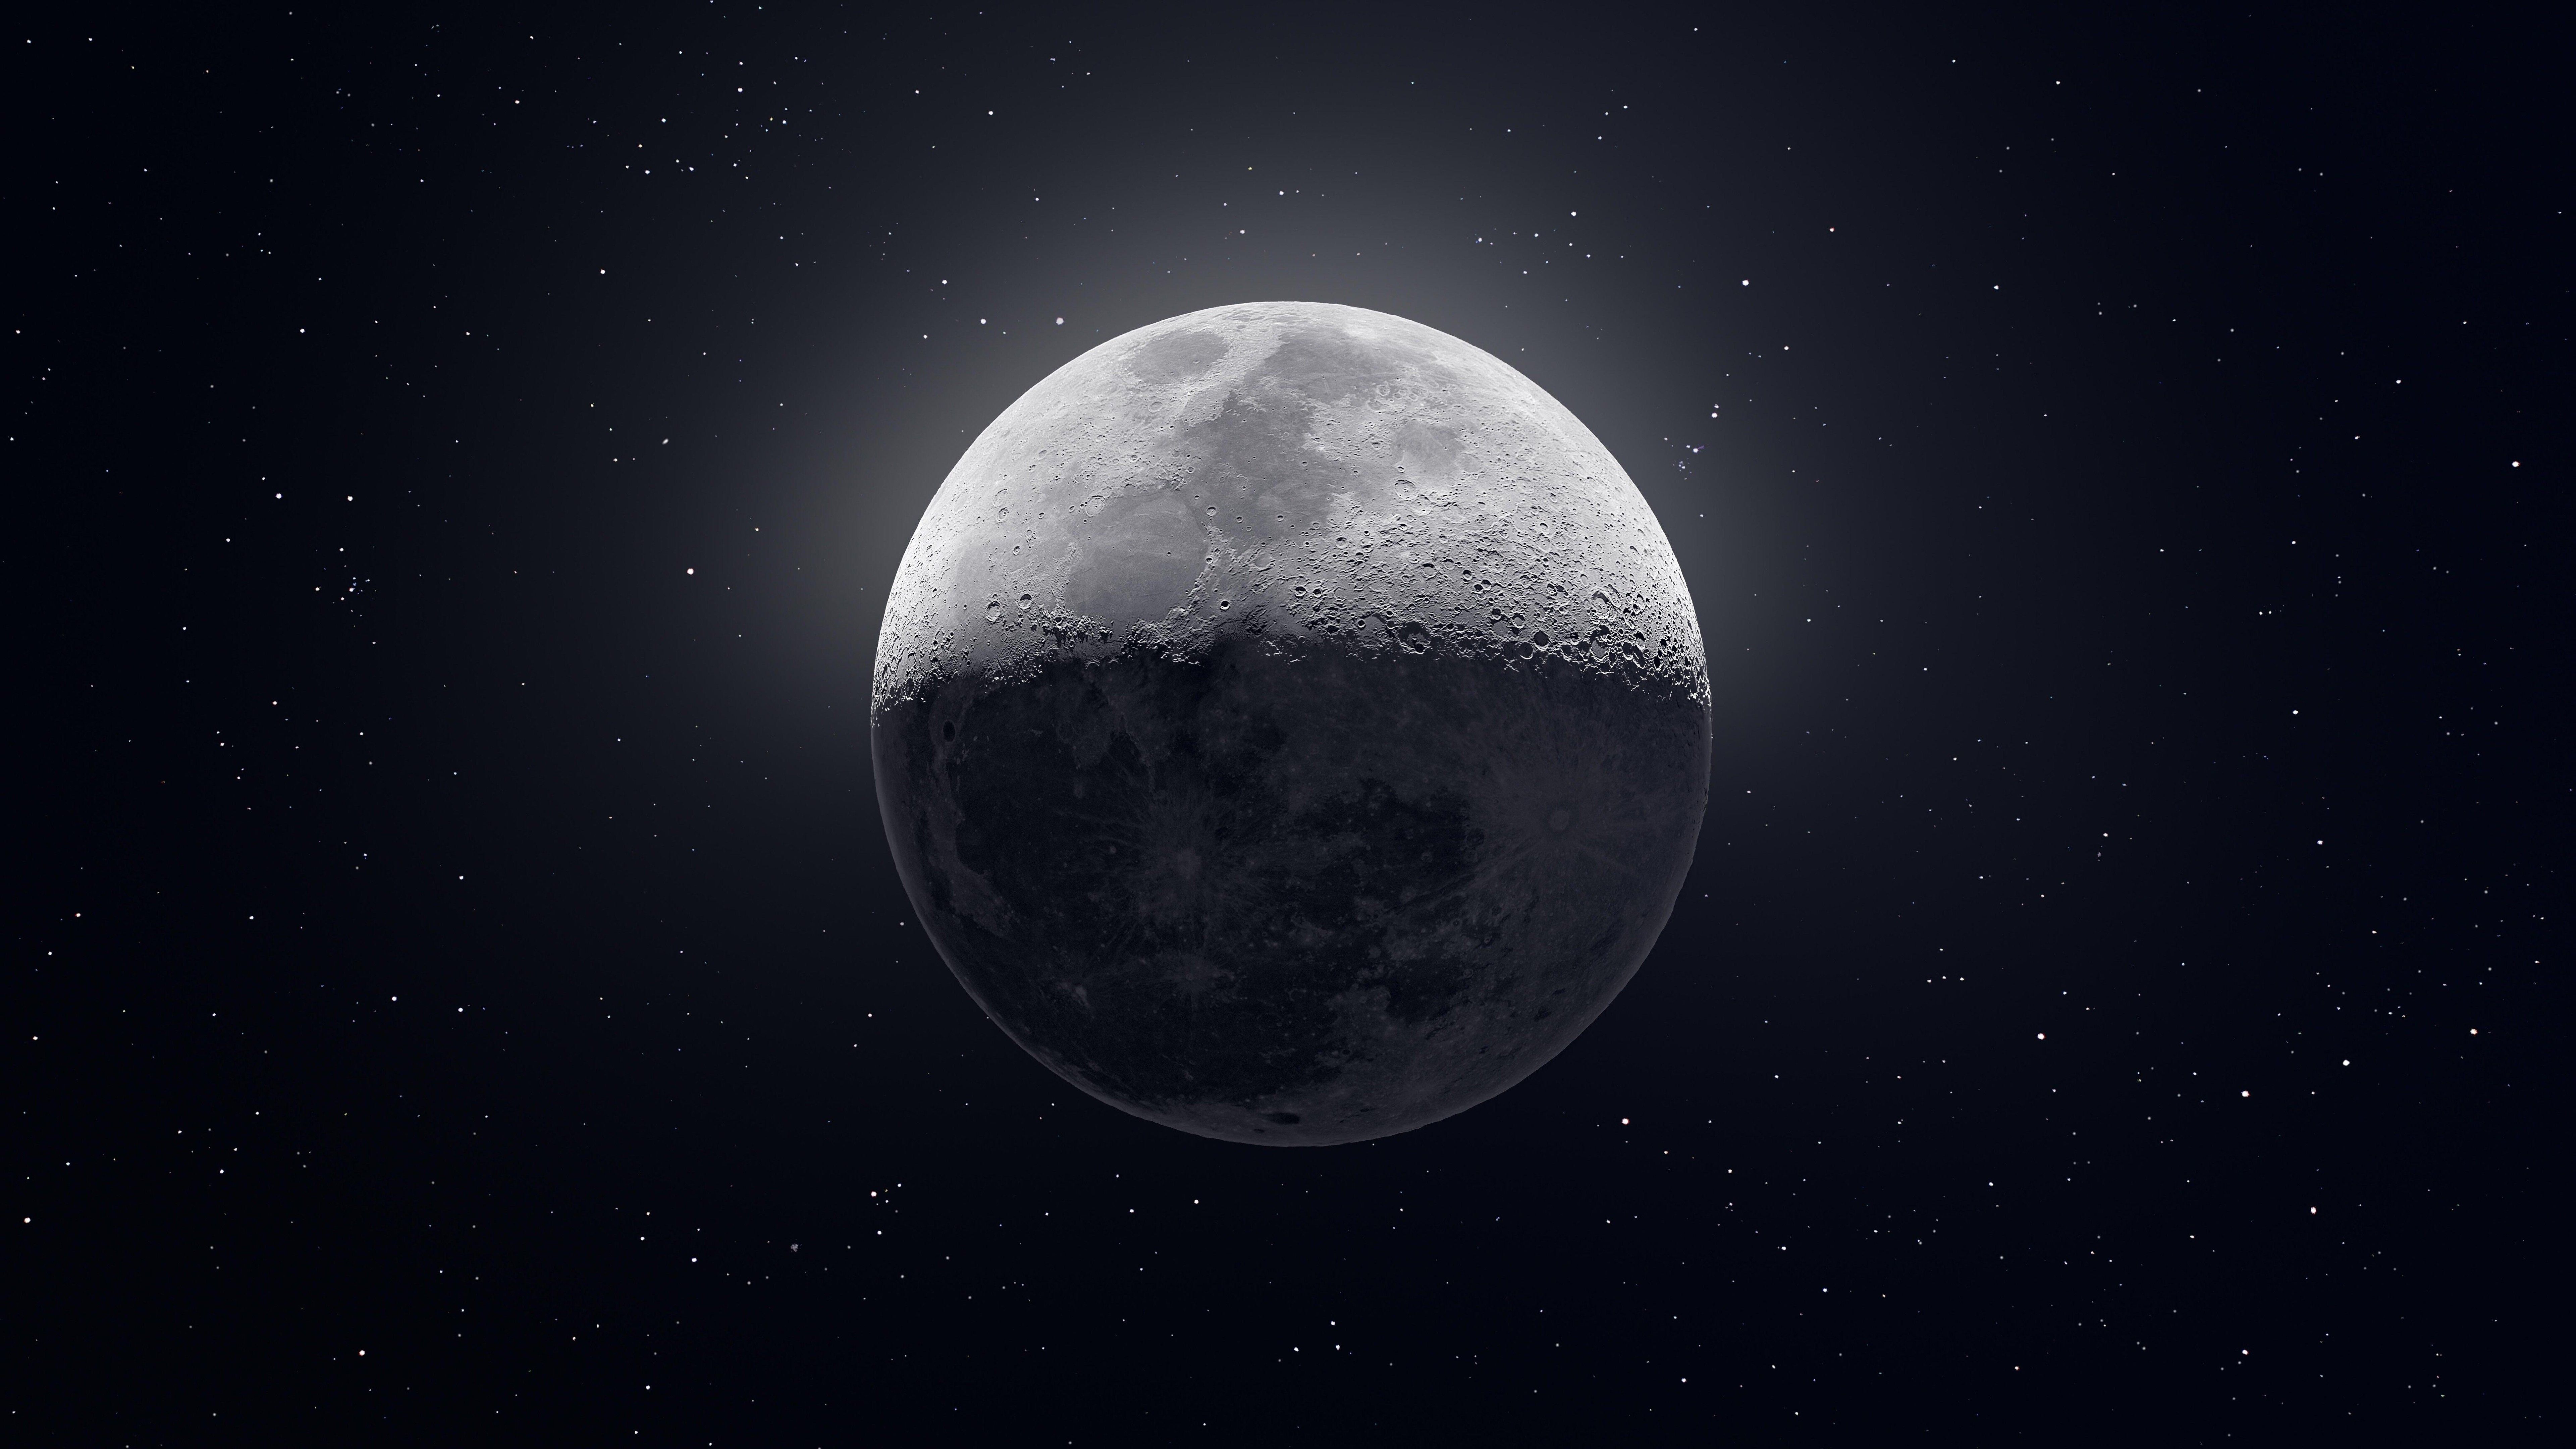 Dark Moon 8k, HD Digital Universe, 4k Wallpaper, Image, Background, Photo and Picture